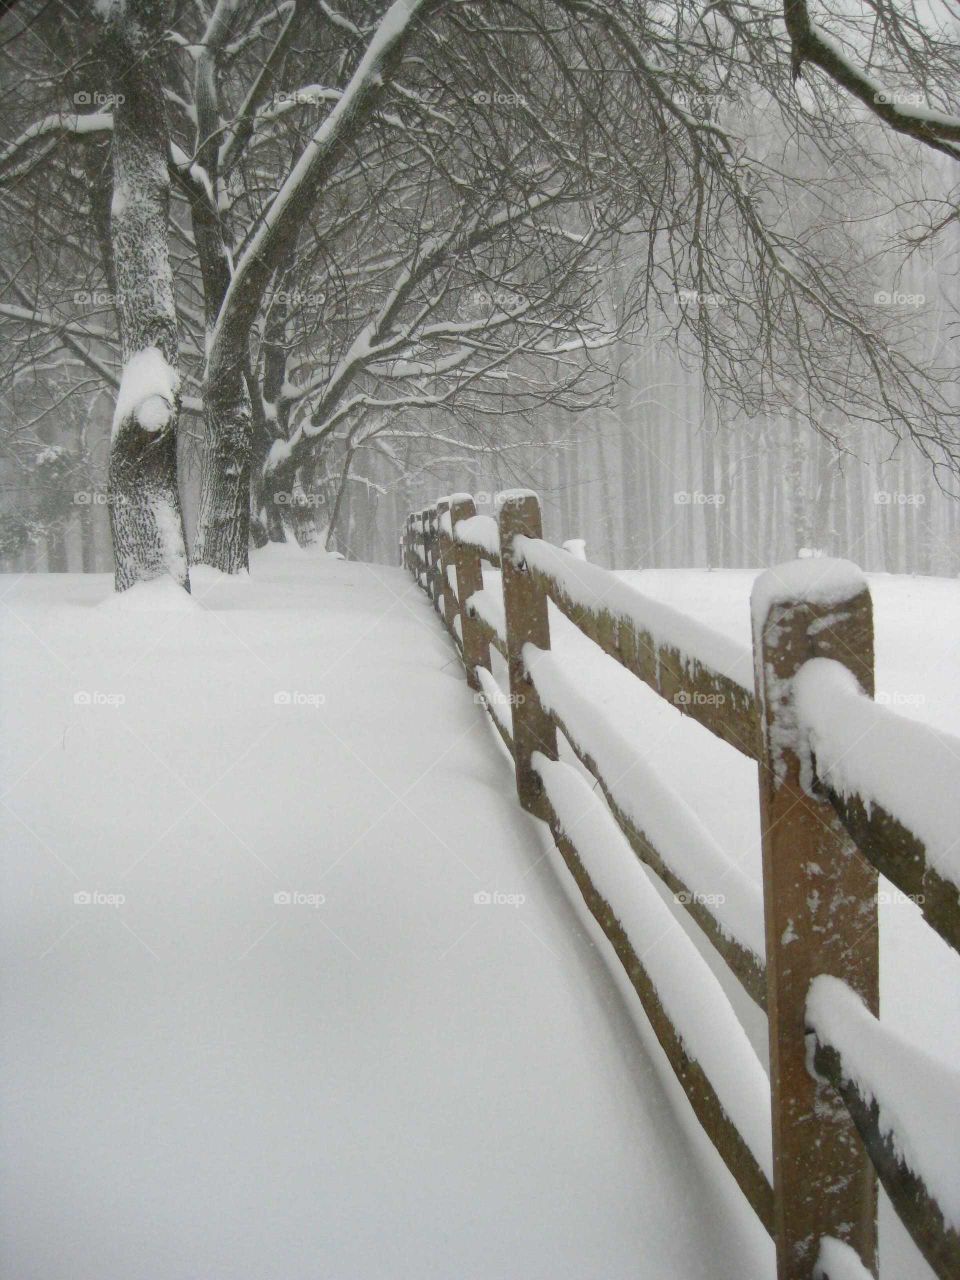 wooden fence in snow